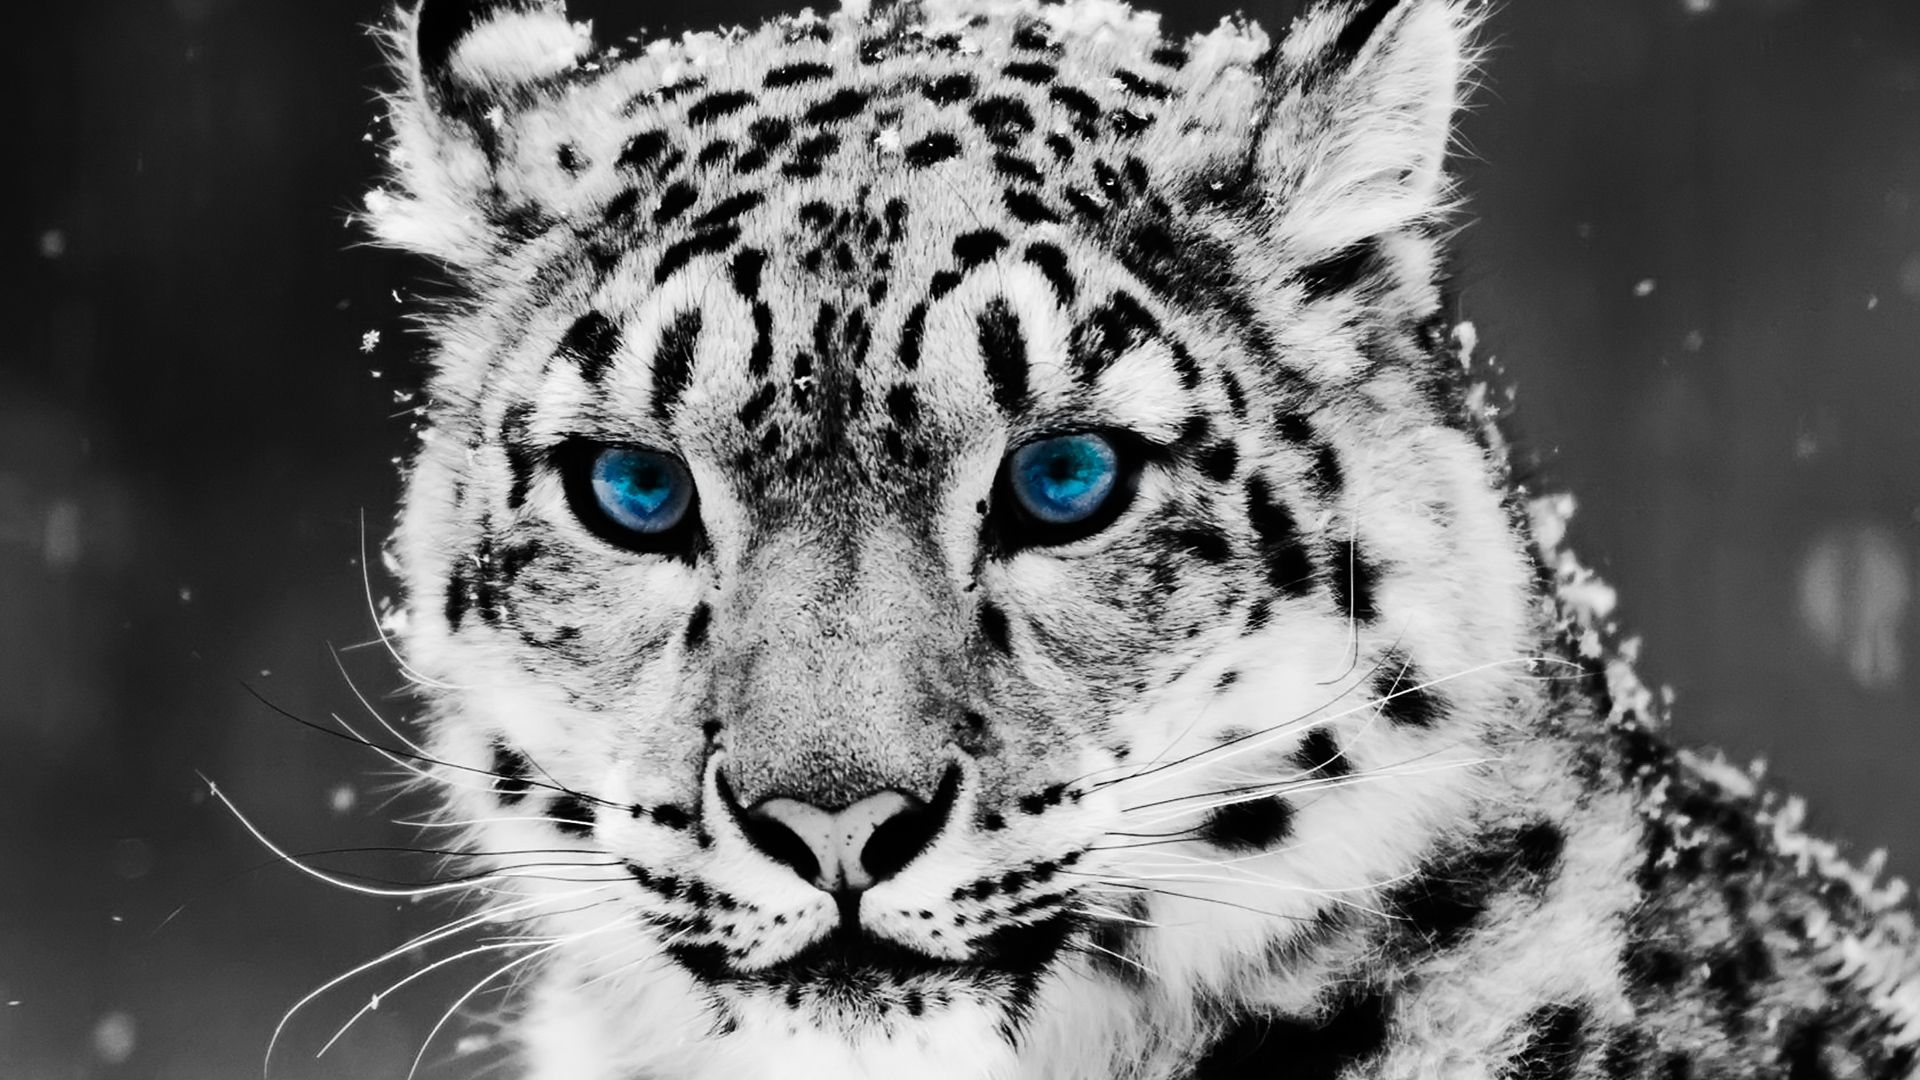 Download Animals Snow Leopard Wallpaper 1920x1080 Full HD Backgrounds